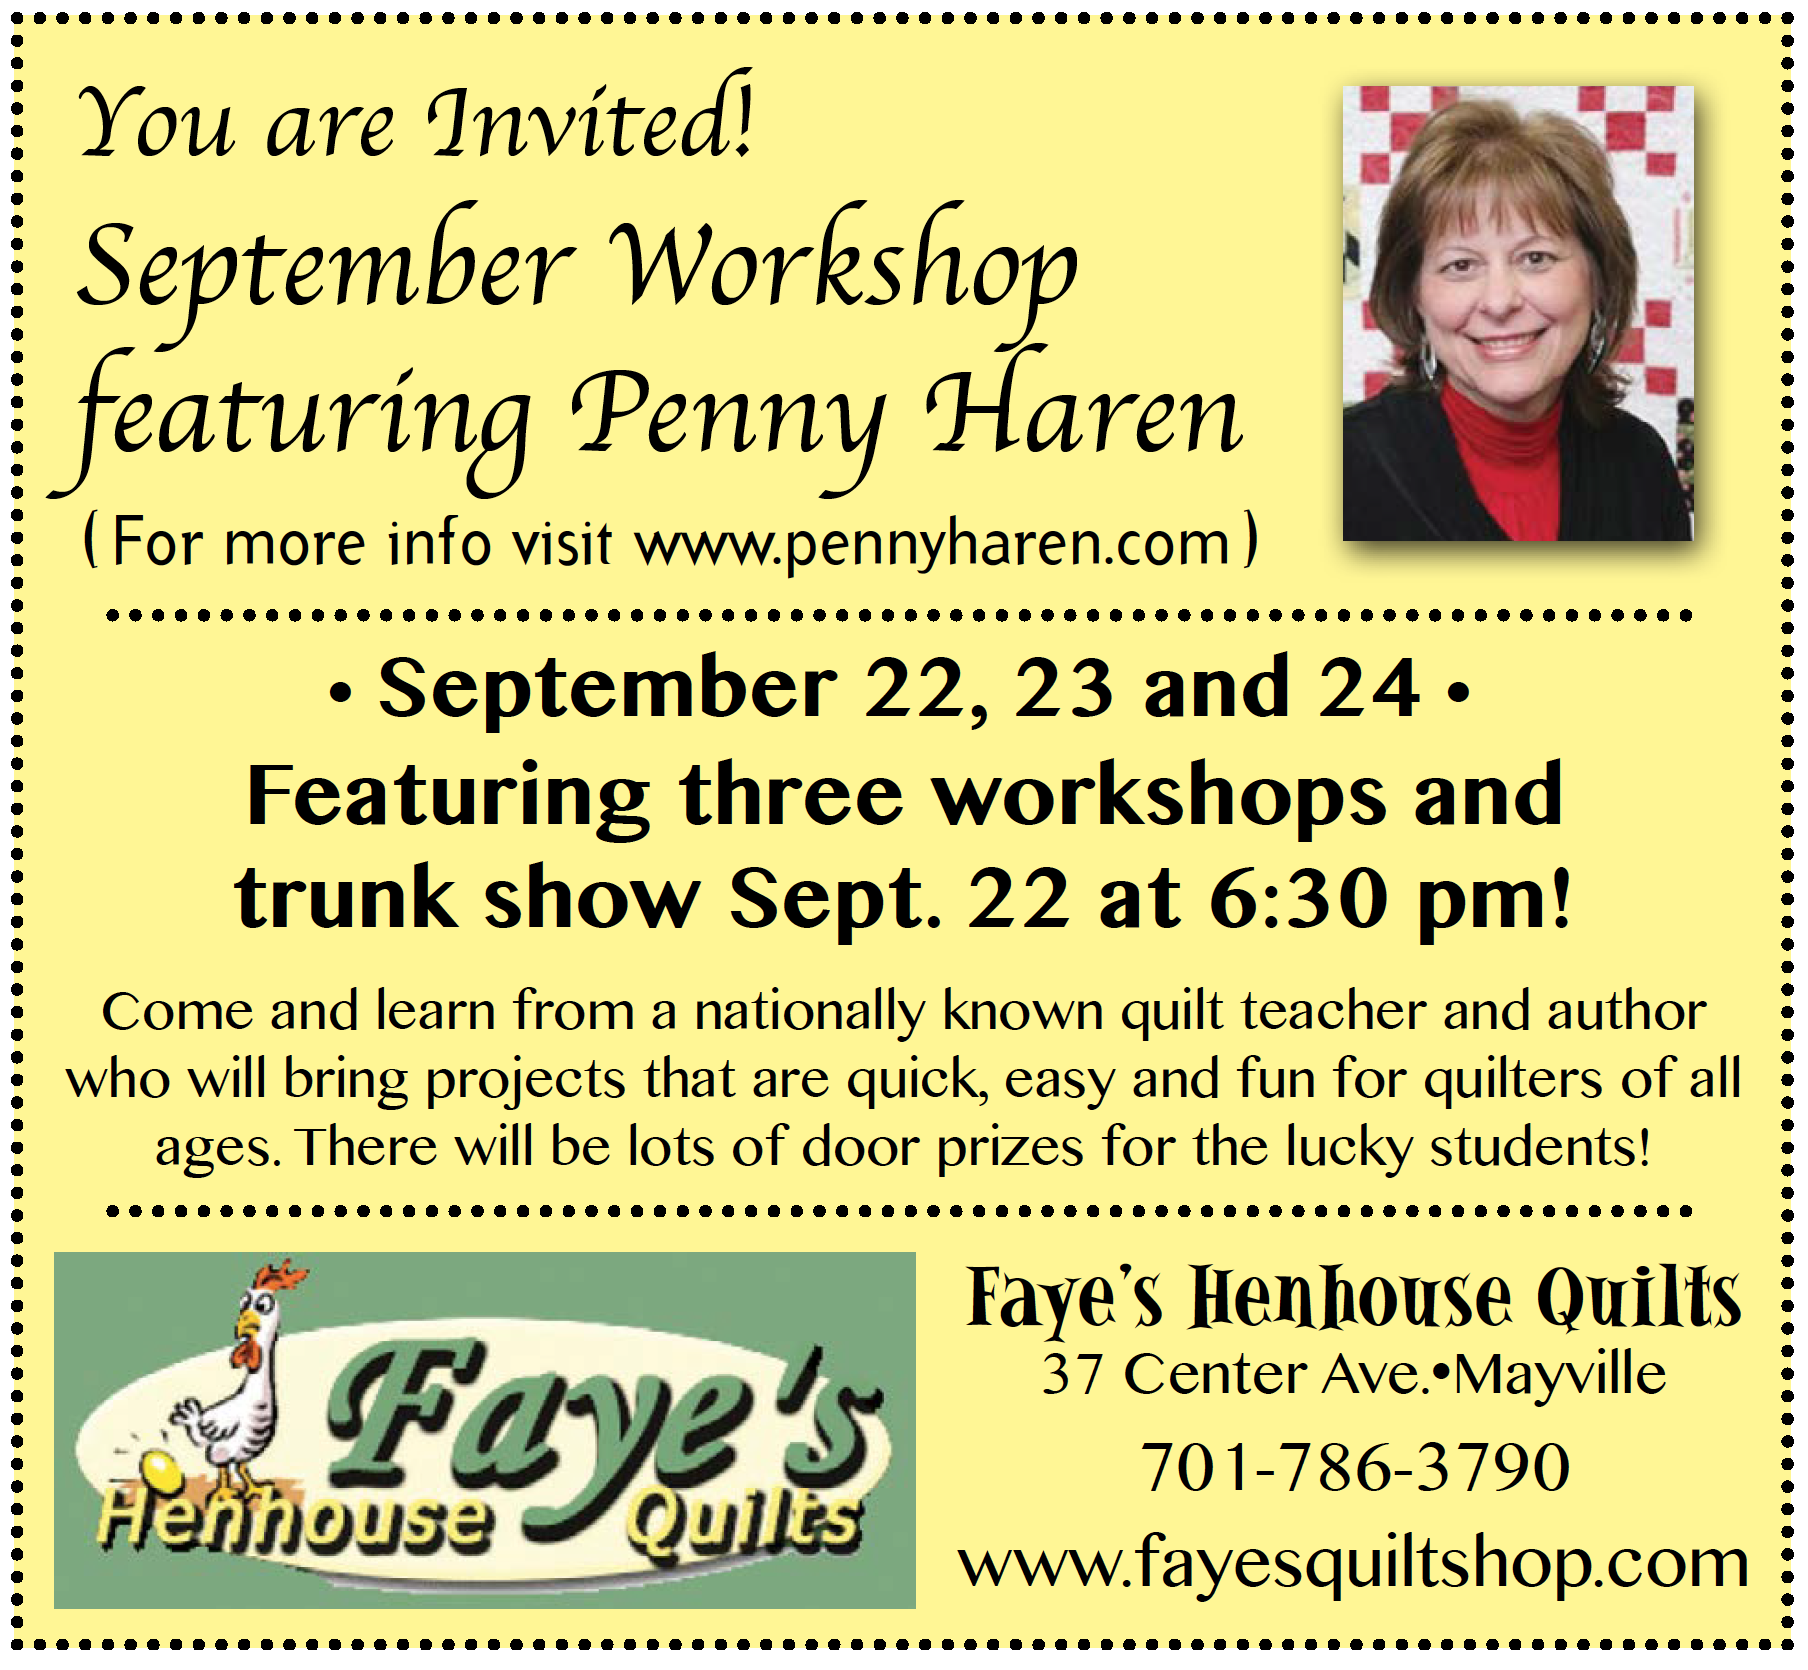 September Quilting Workshop - Featuring Penny Haren @ Faye's Henhouse Quilts